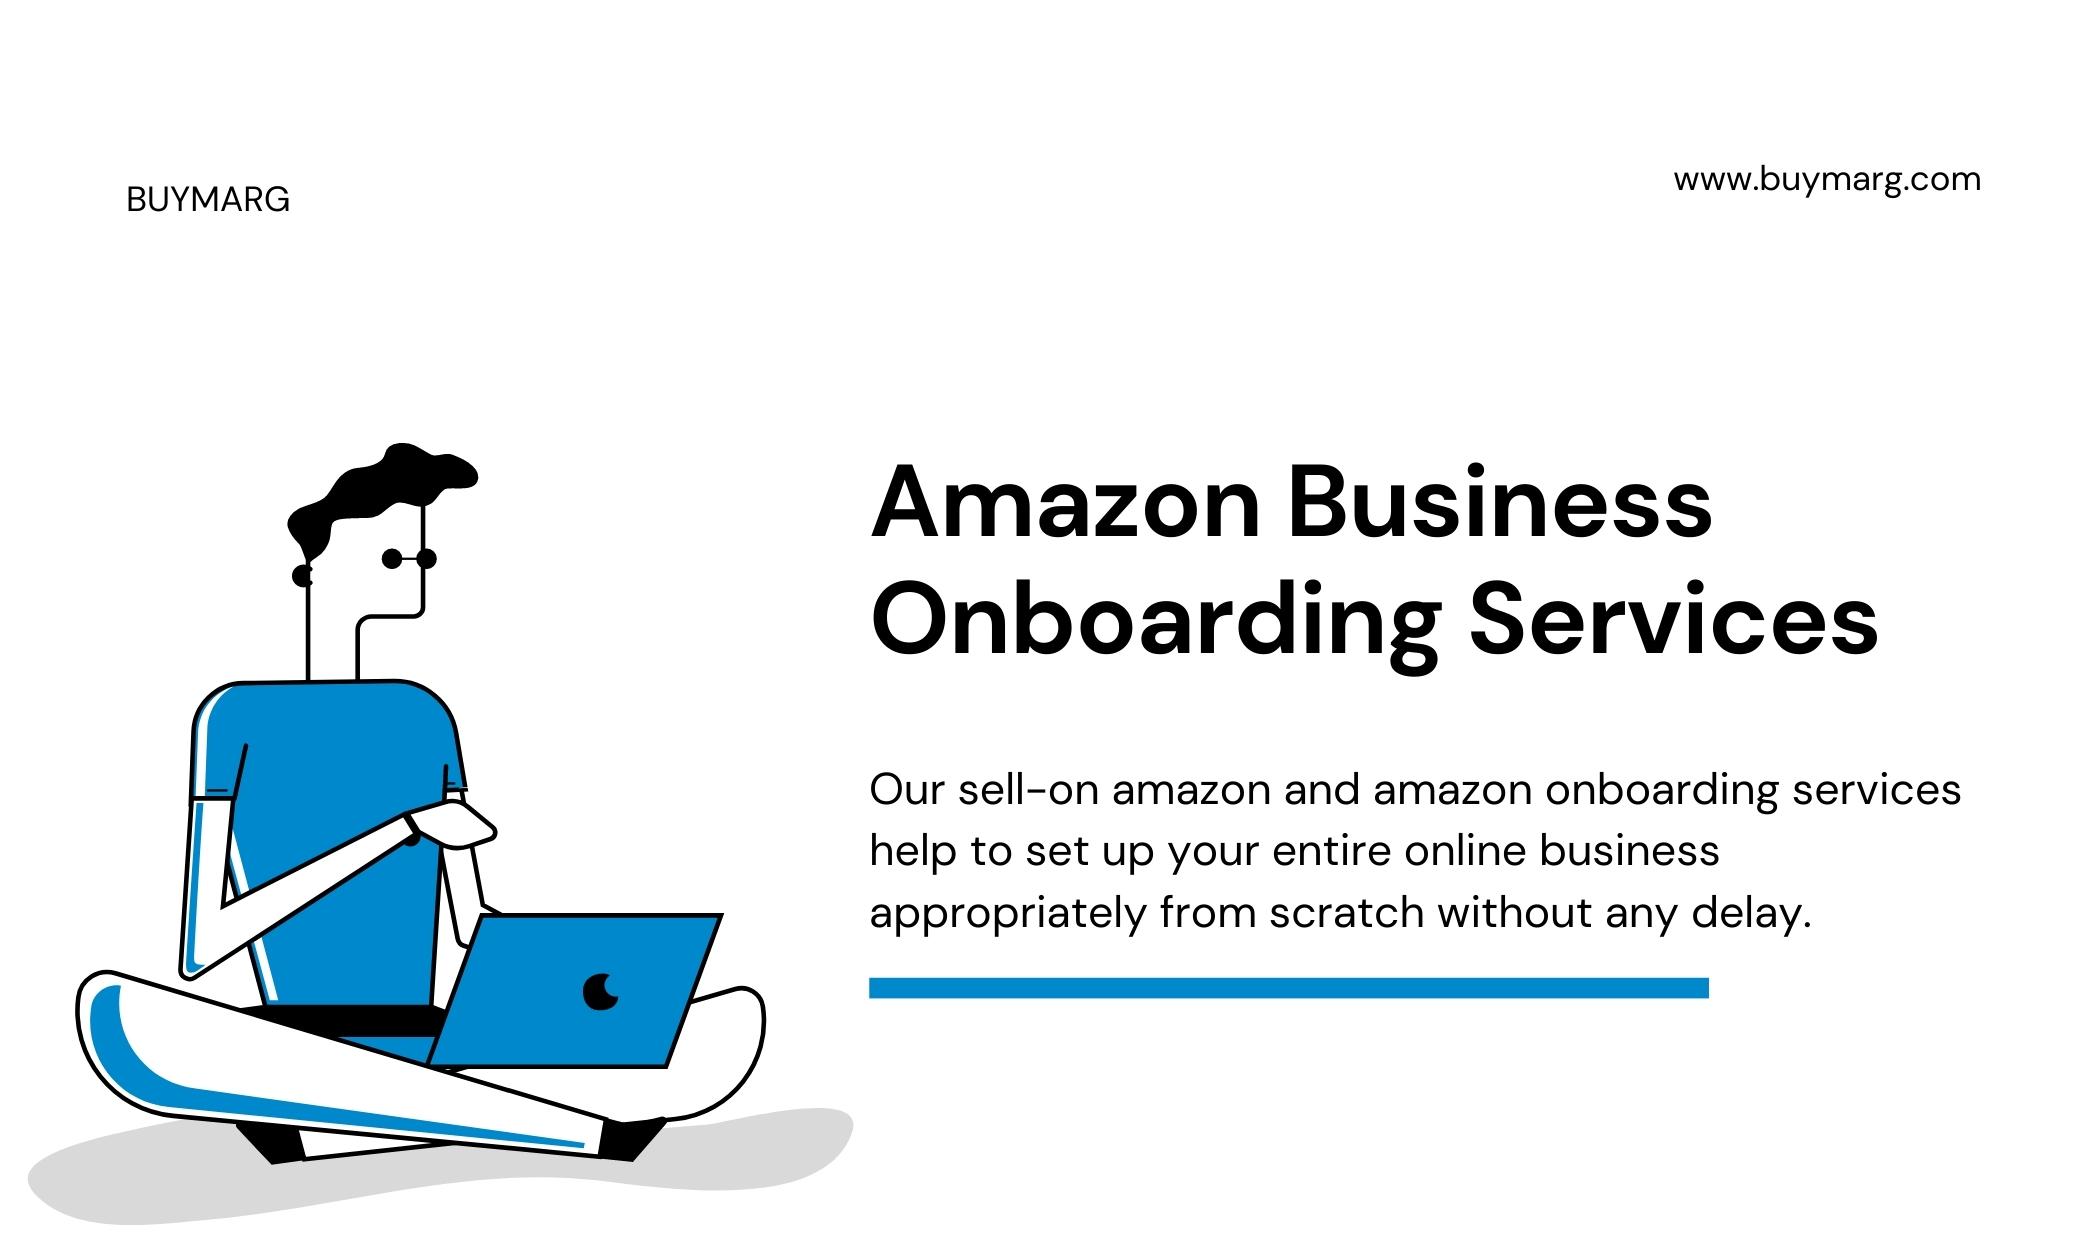 Sell On Amazon and Amazon Business Onboarding Services